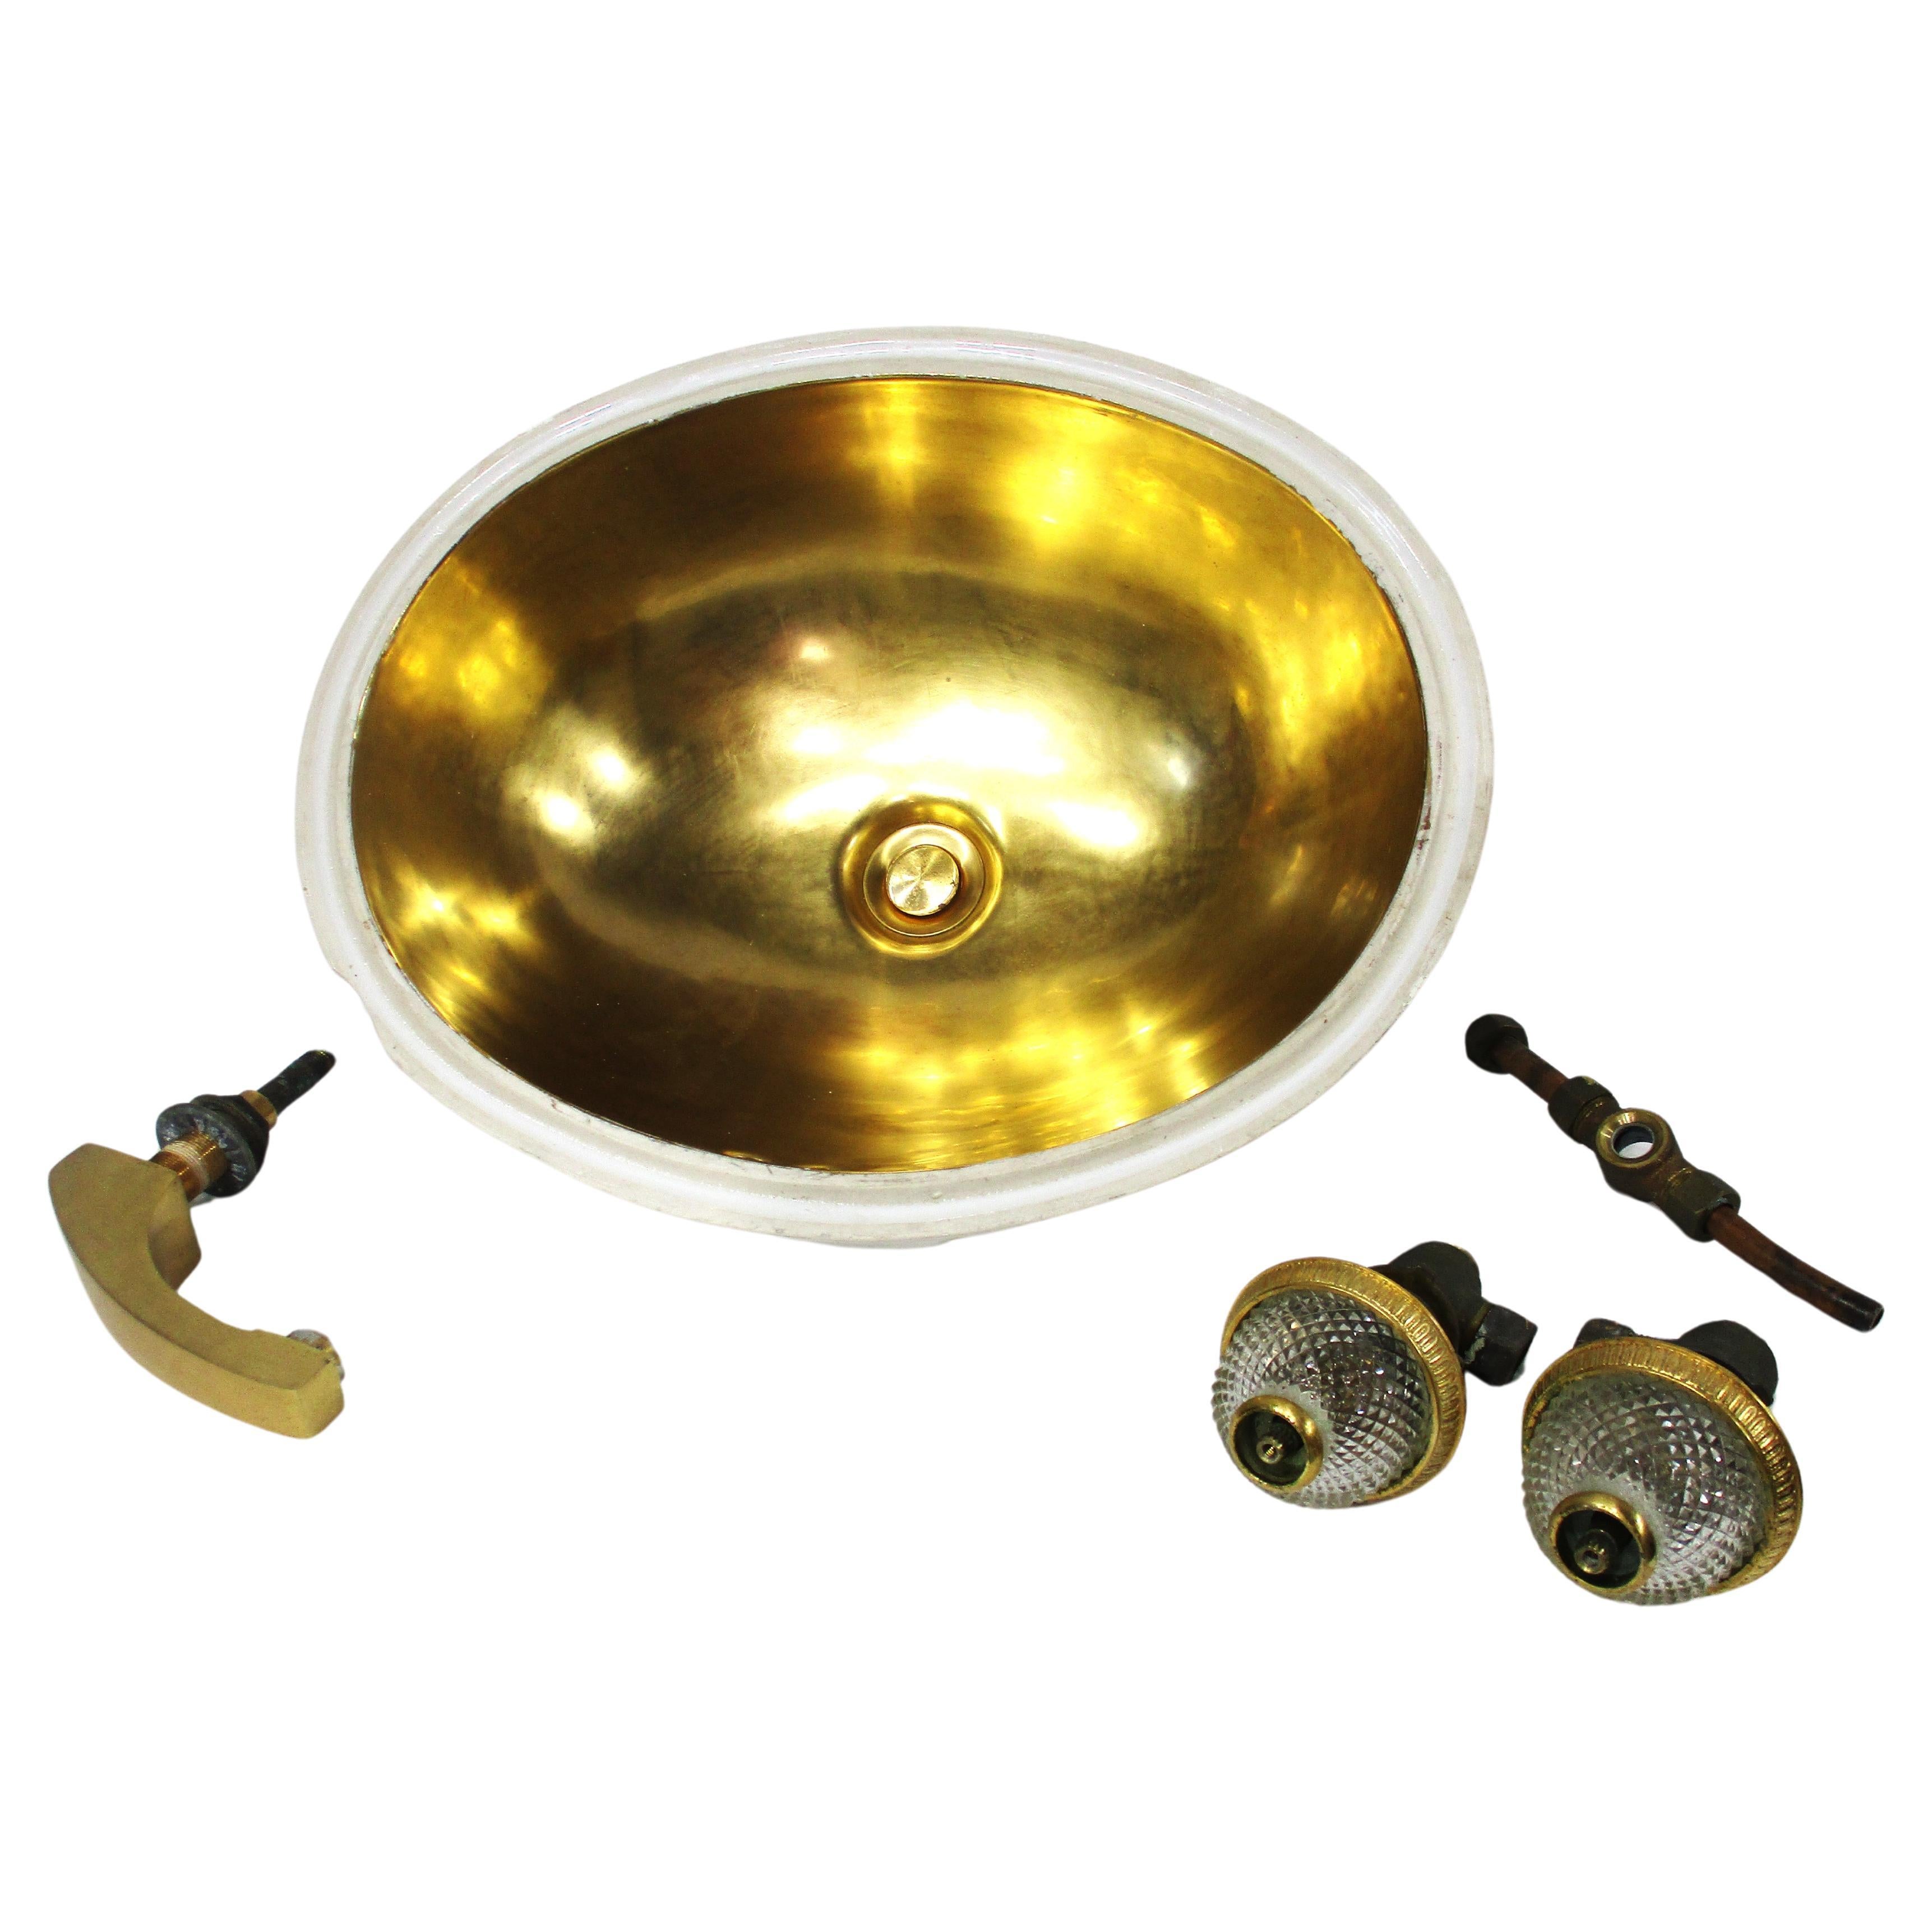 Sherle Wagner Attributed Vintage Bathroom Sink and Fixtures    For Sale